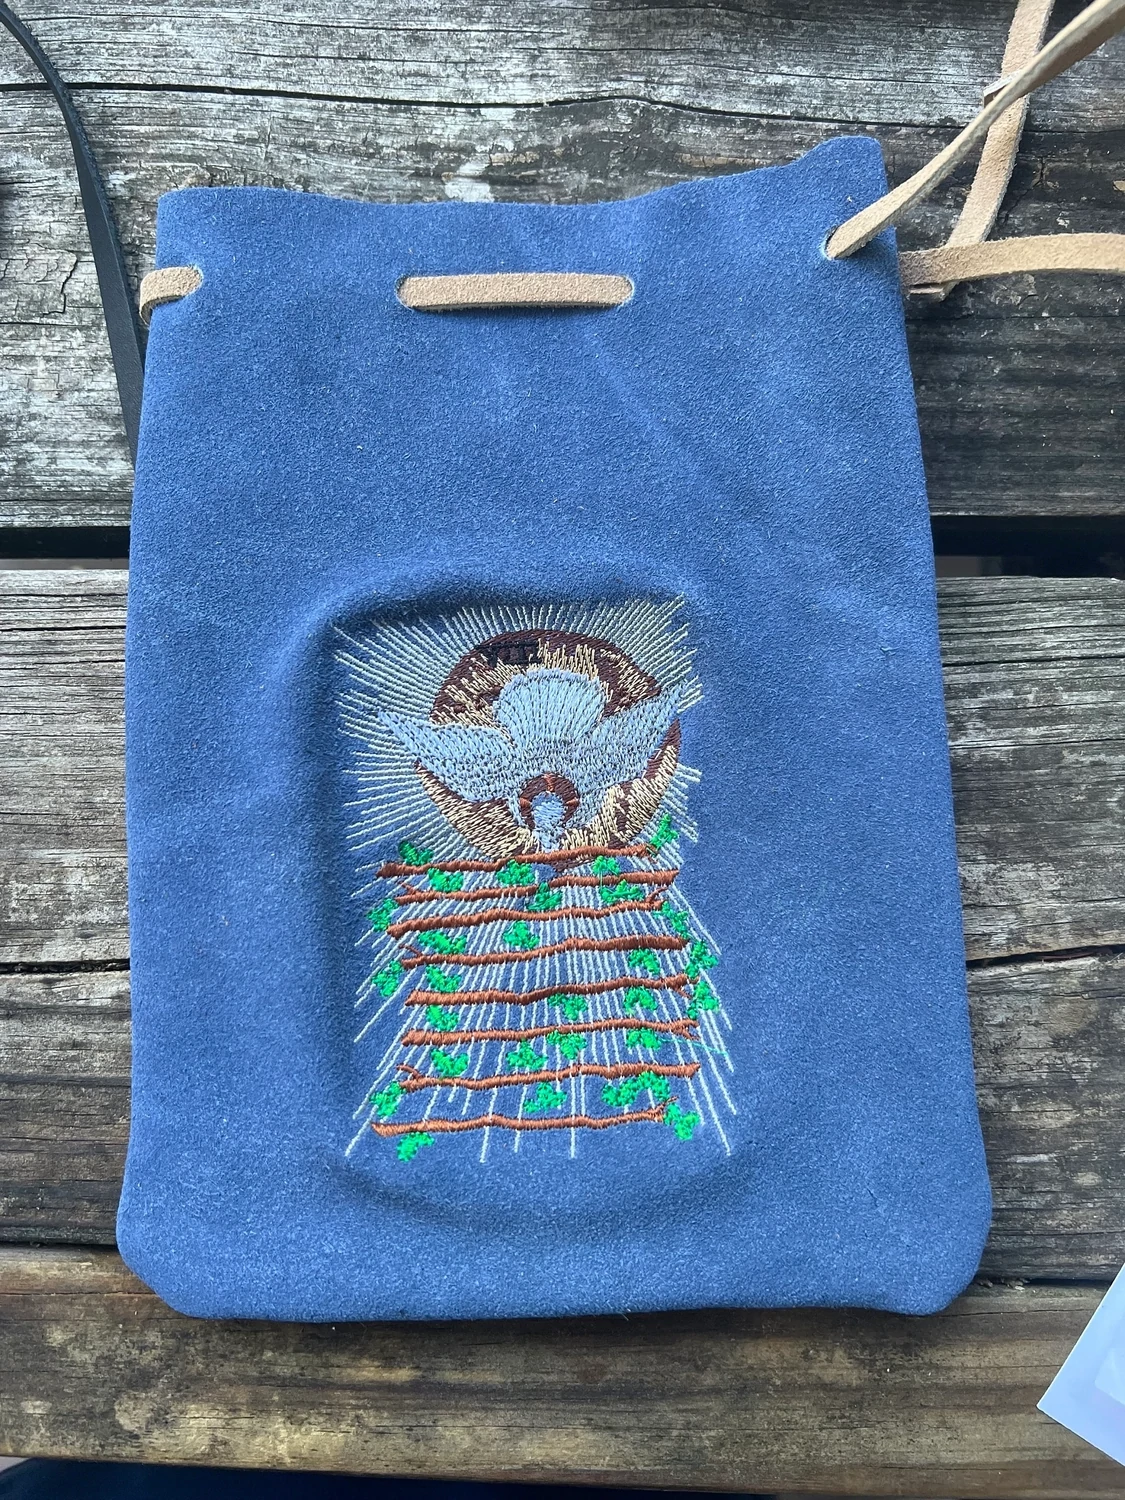 Suede Embroidered Suede Leather Bag 8.5x6 - Eight of Wands